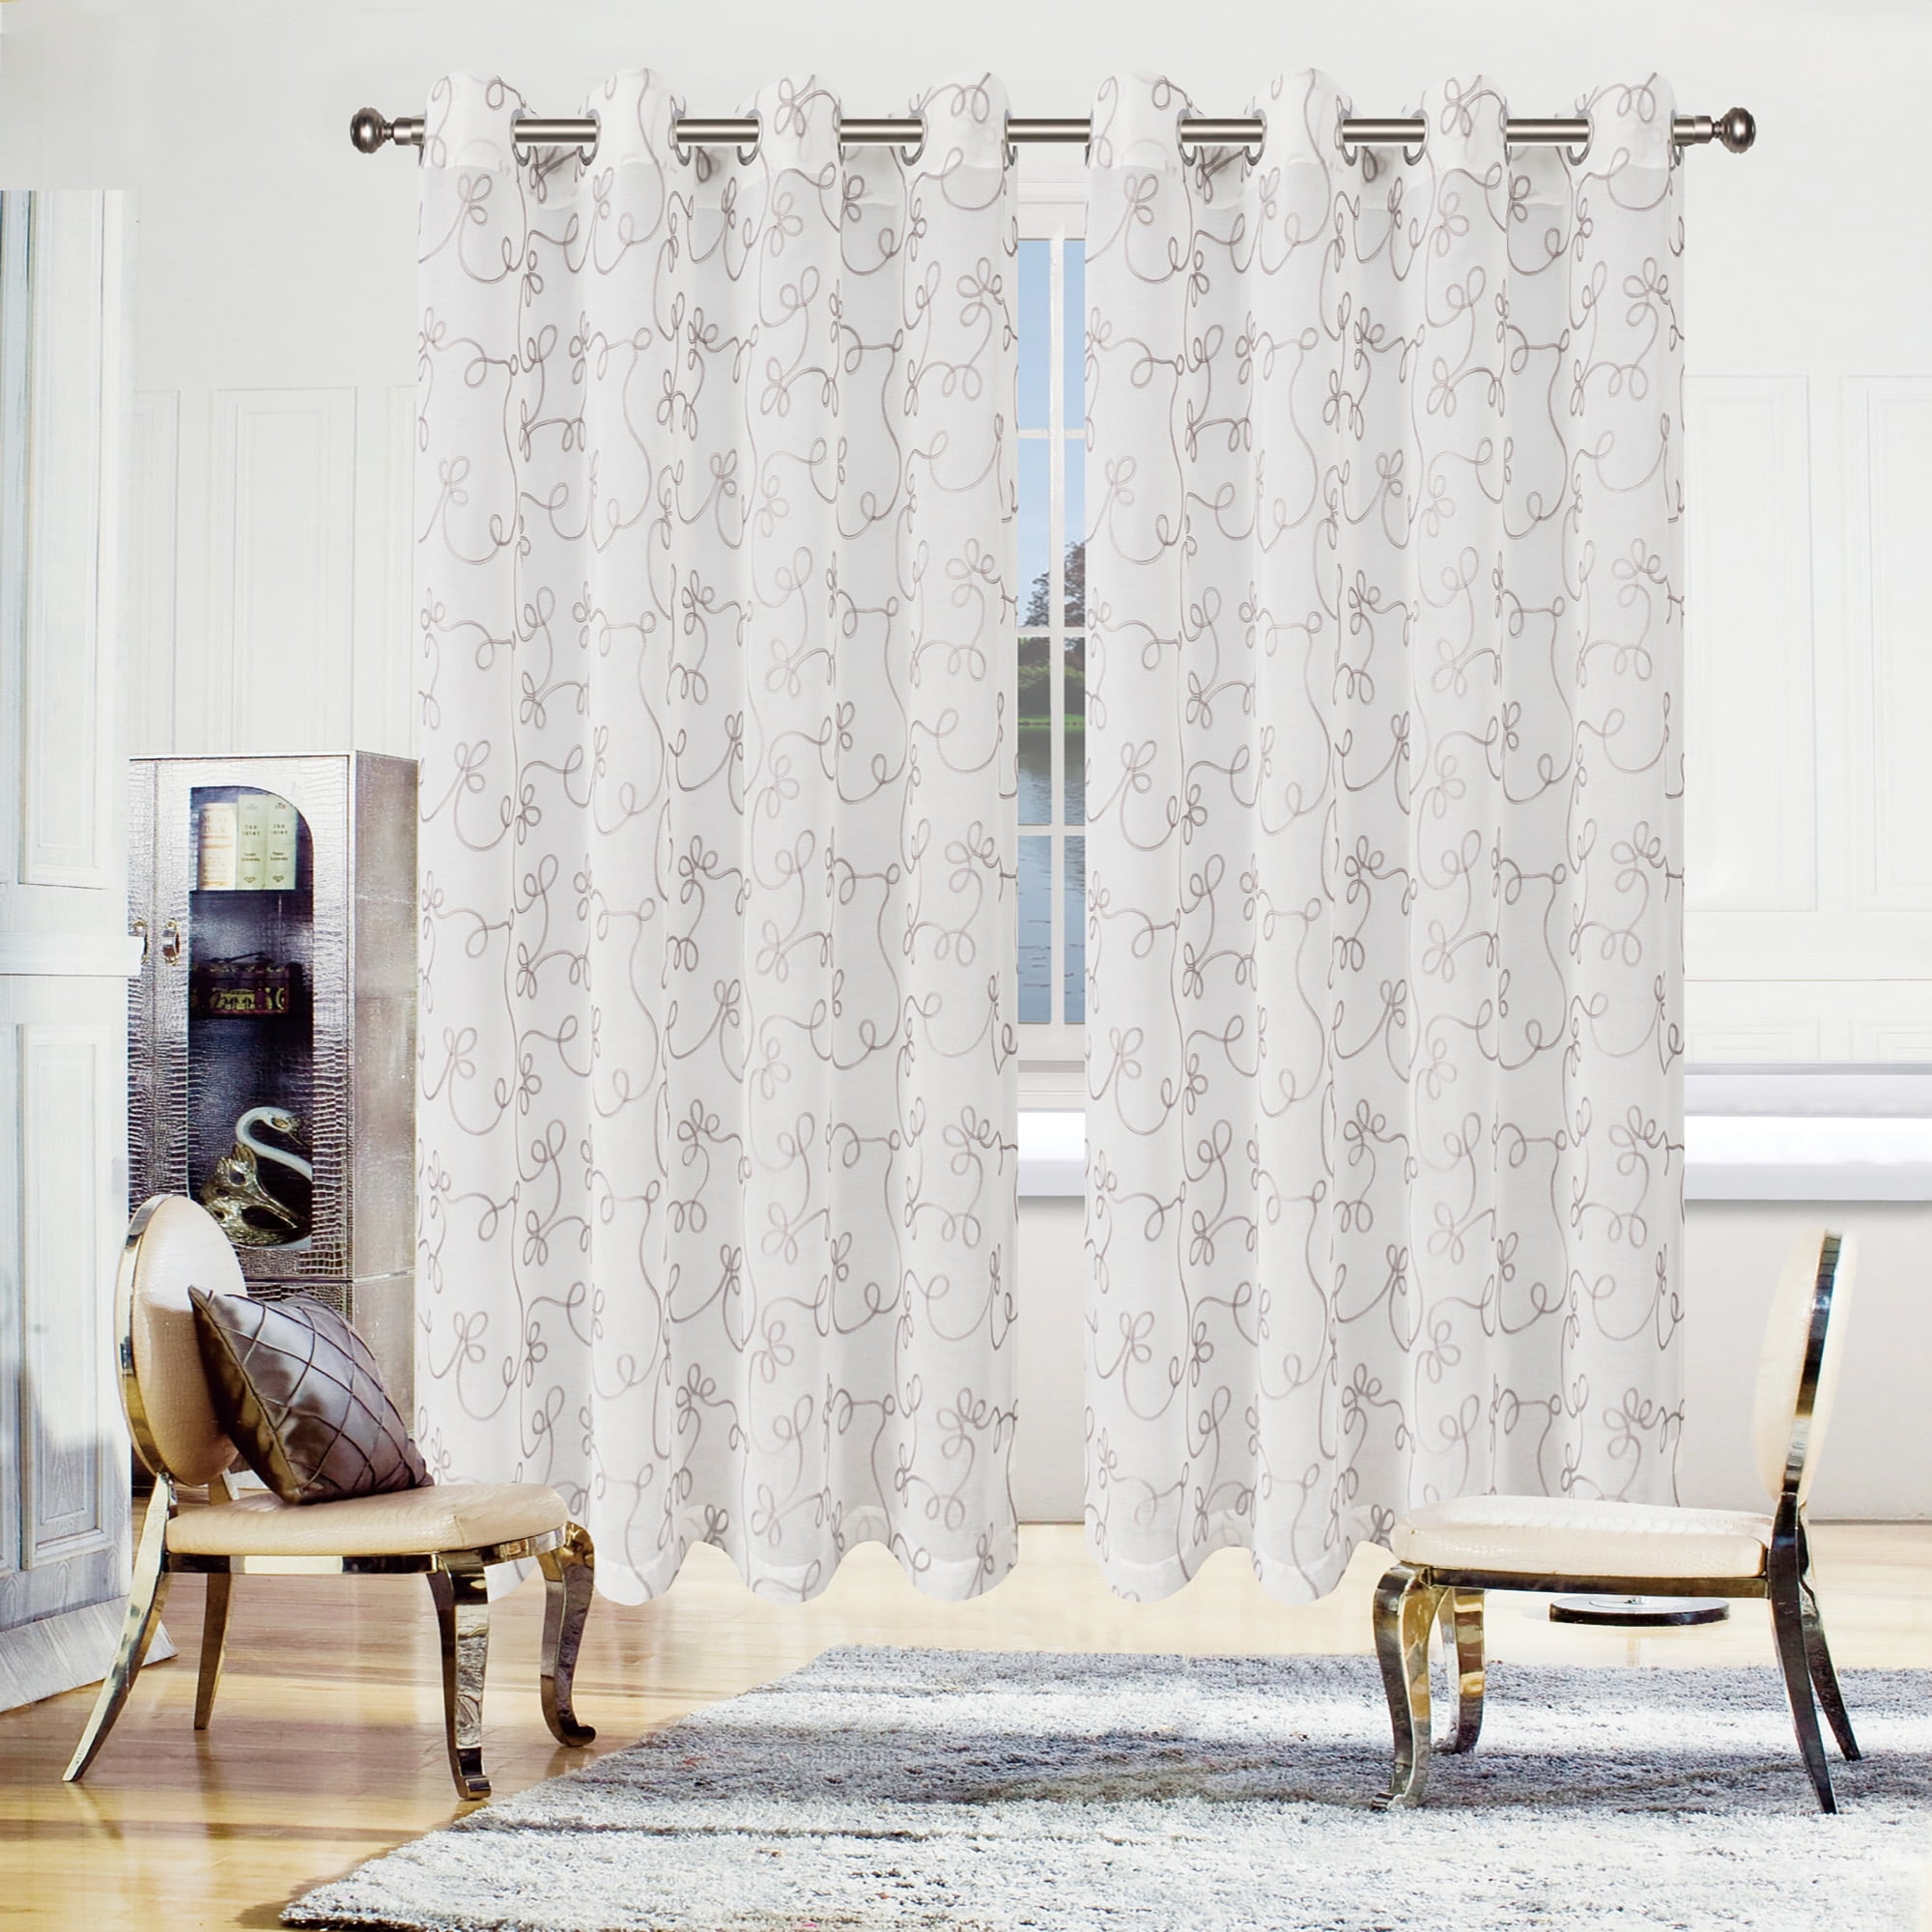 Curtainworks Kendall Solid Semi-Sheer Grommet Single Curtain Panel - Size: 52 W x 84 L, Color: Ivory